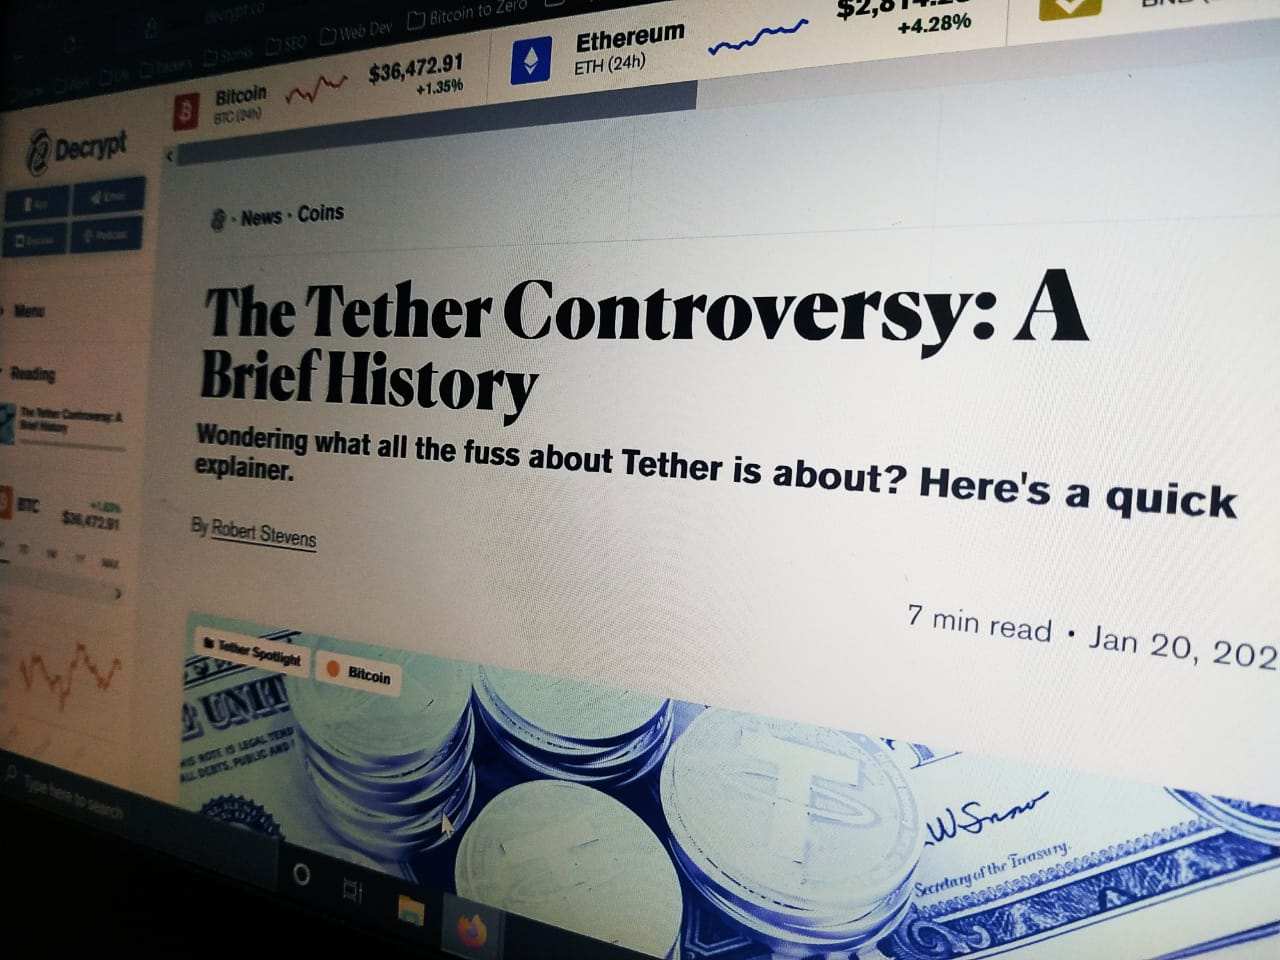 Article about the Tether stablecoin controversy.